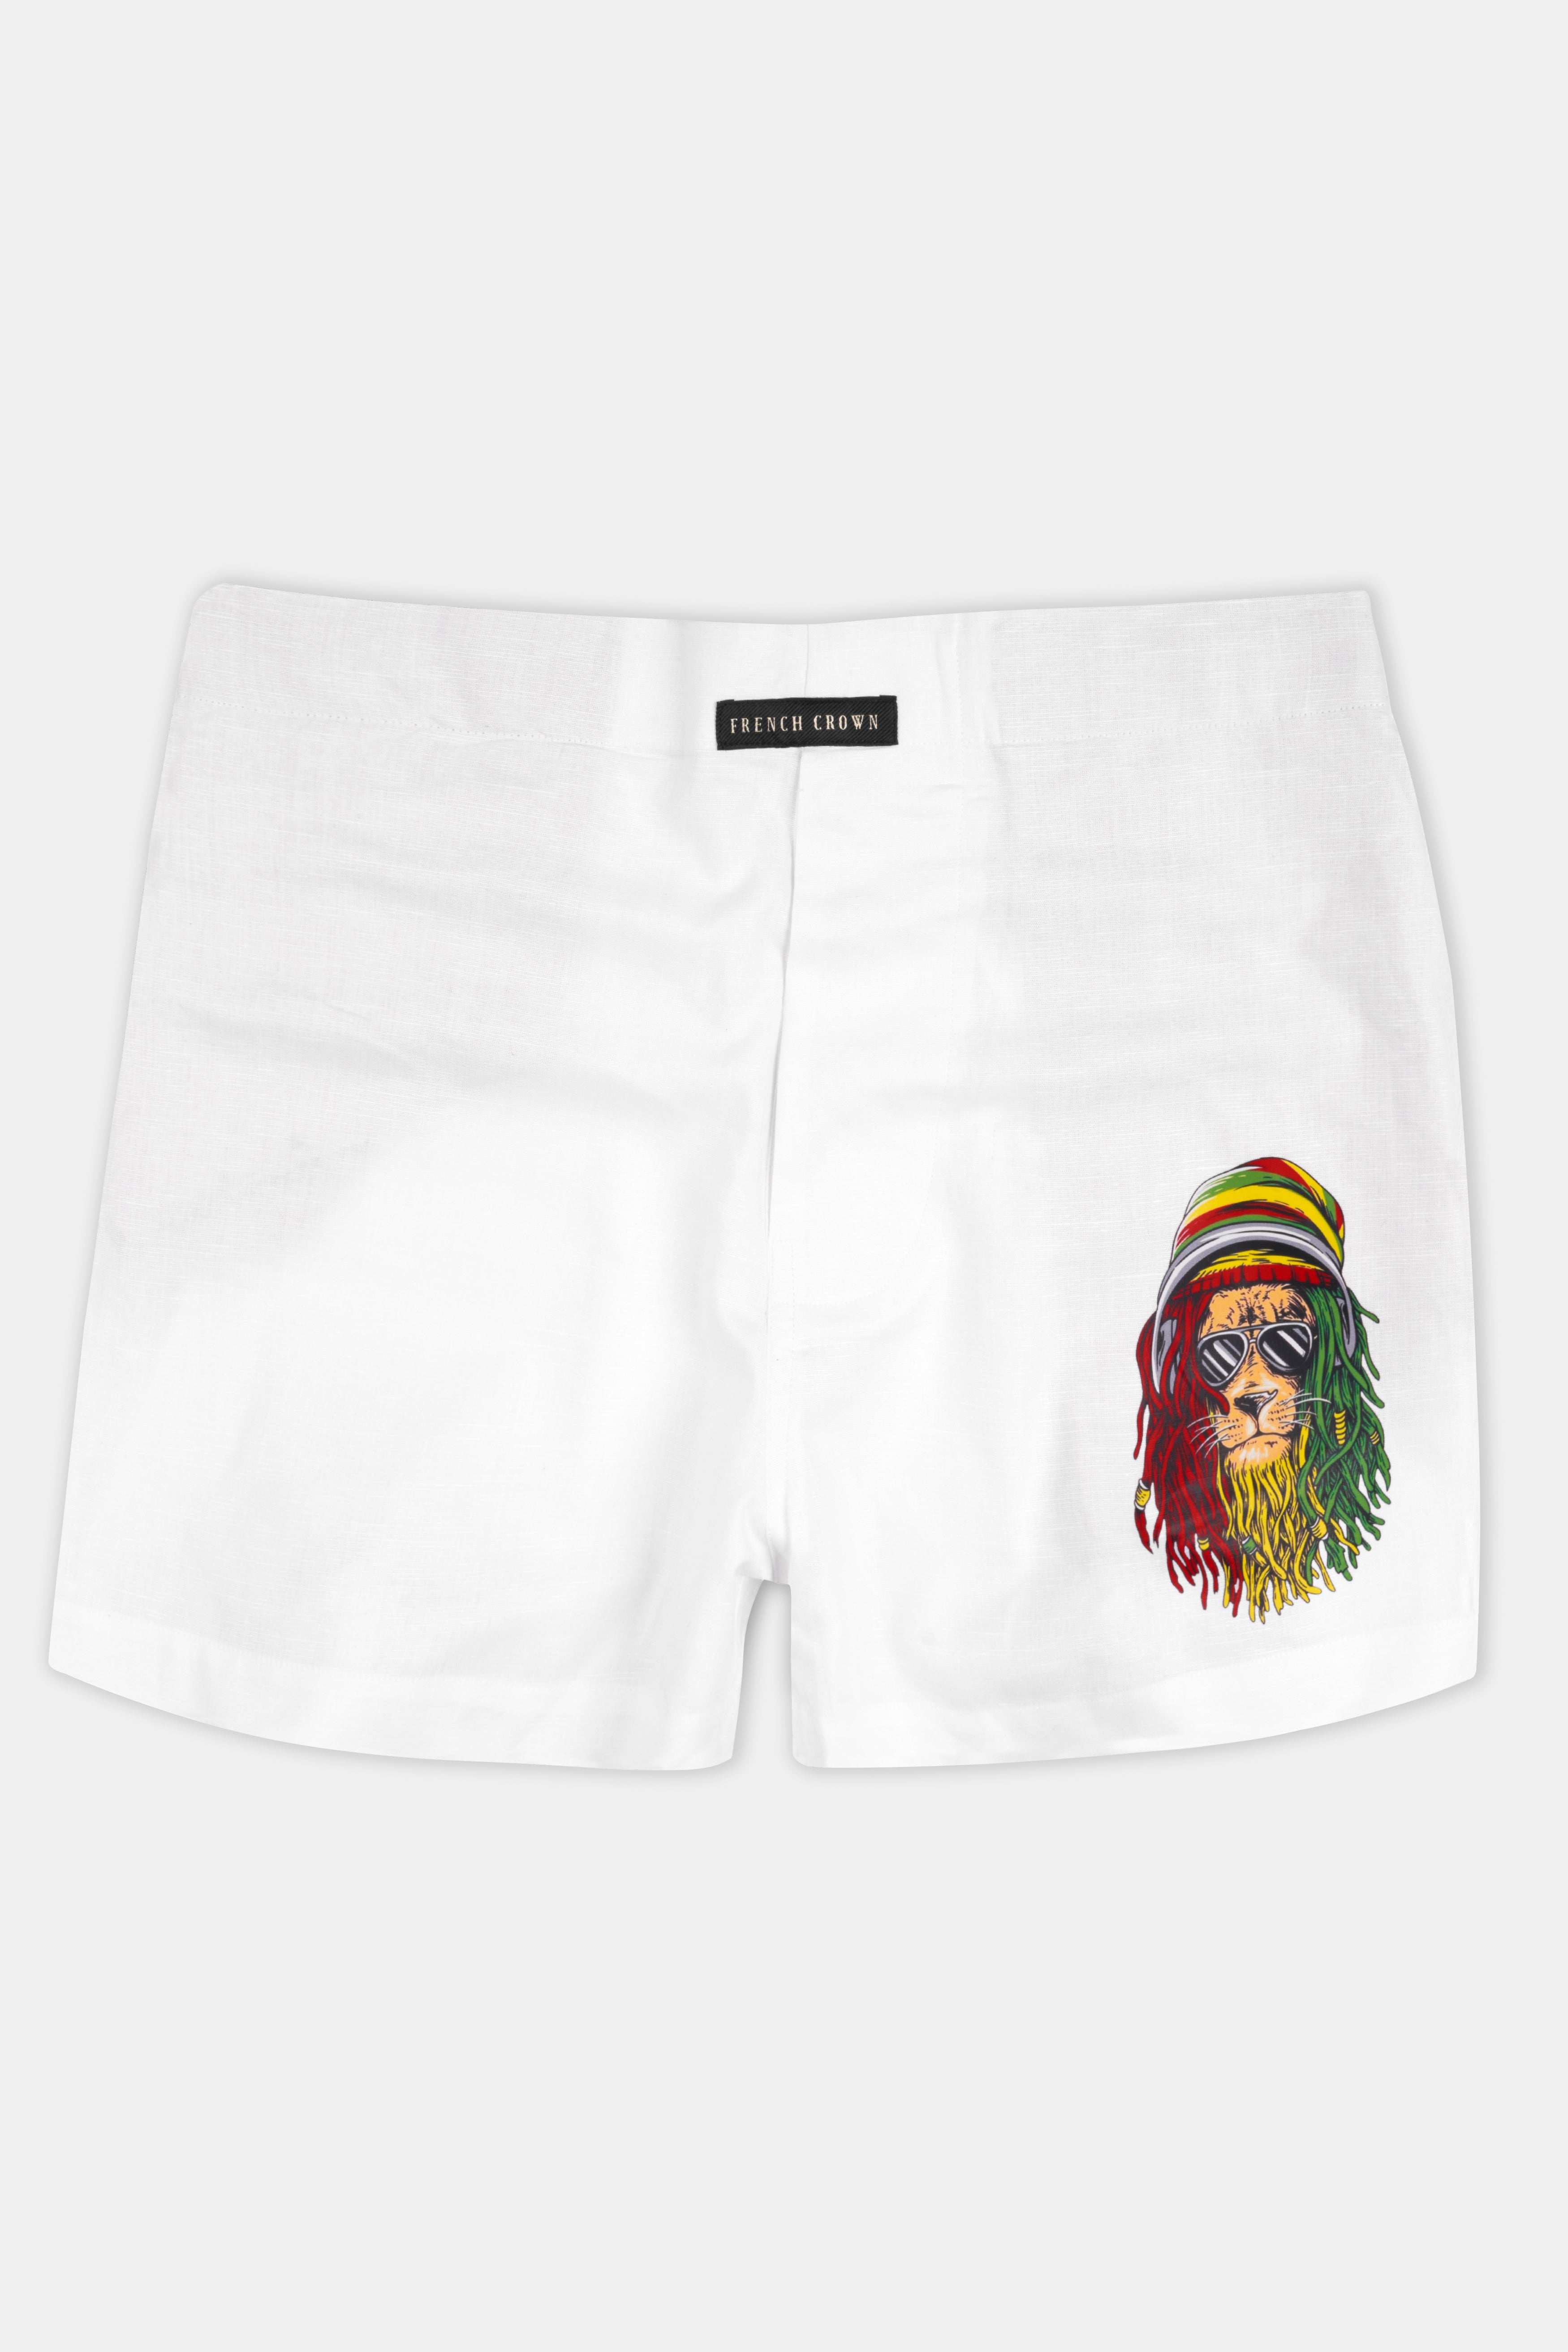 Bright White Funky Lion Printed Luxurious Linen Boxers BX471-RPRT104-28, BX471-RPRT104-30, BX471-RPRT104-32, BX471-RPRT104-34, BX471-RPRT104-36, BX471-RPRT104-38, BX471-RPRT104-40, BX471-RPRT104-42, BX471-RPRT104-44